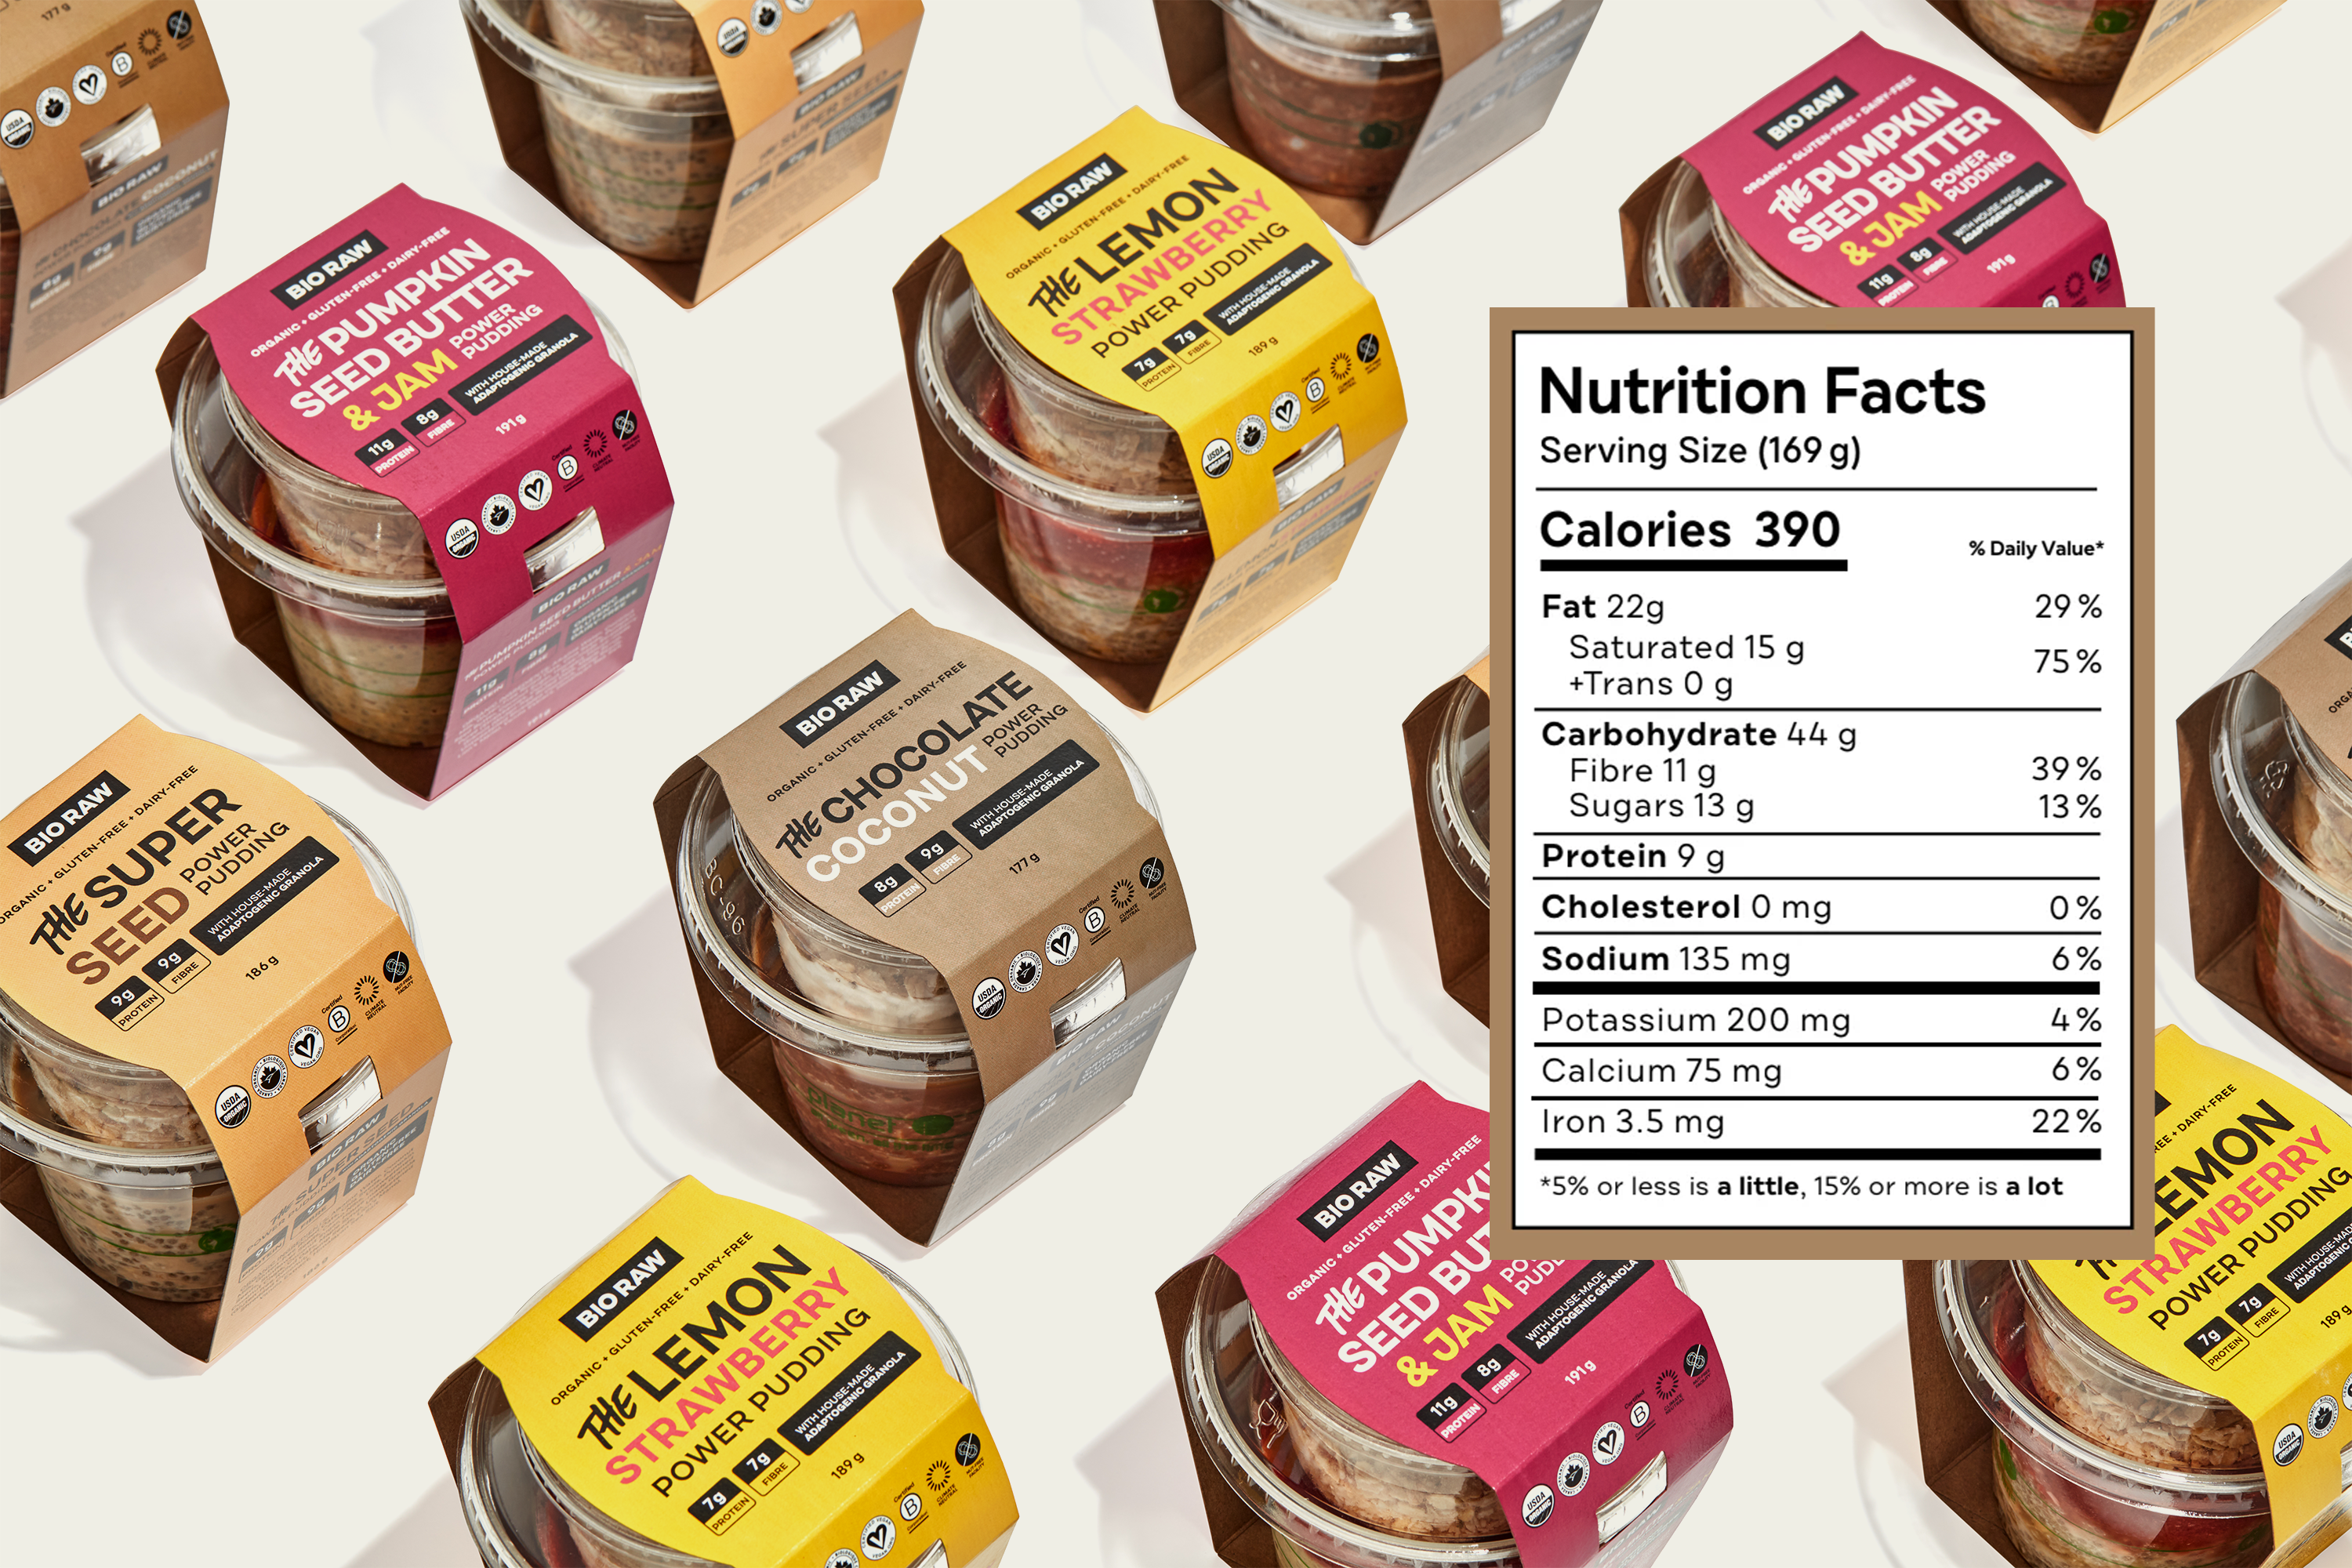 Arrangement of various branded seed-based puddings with visible nutrition facts label.